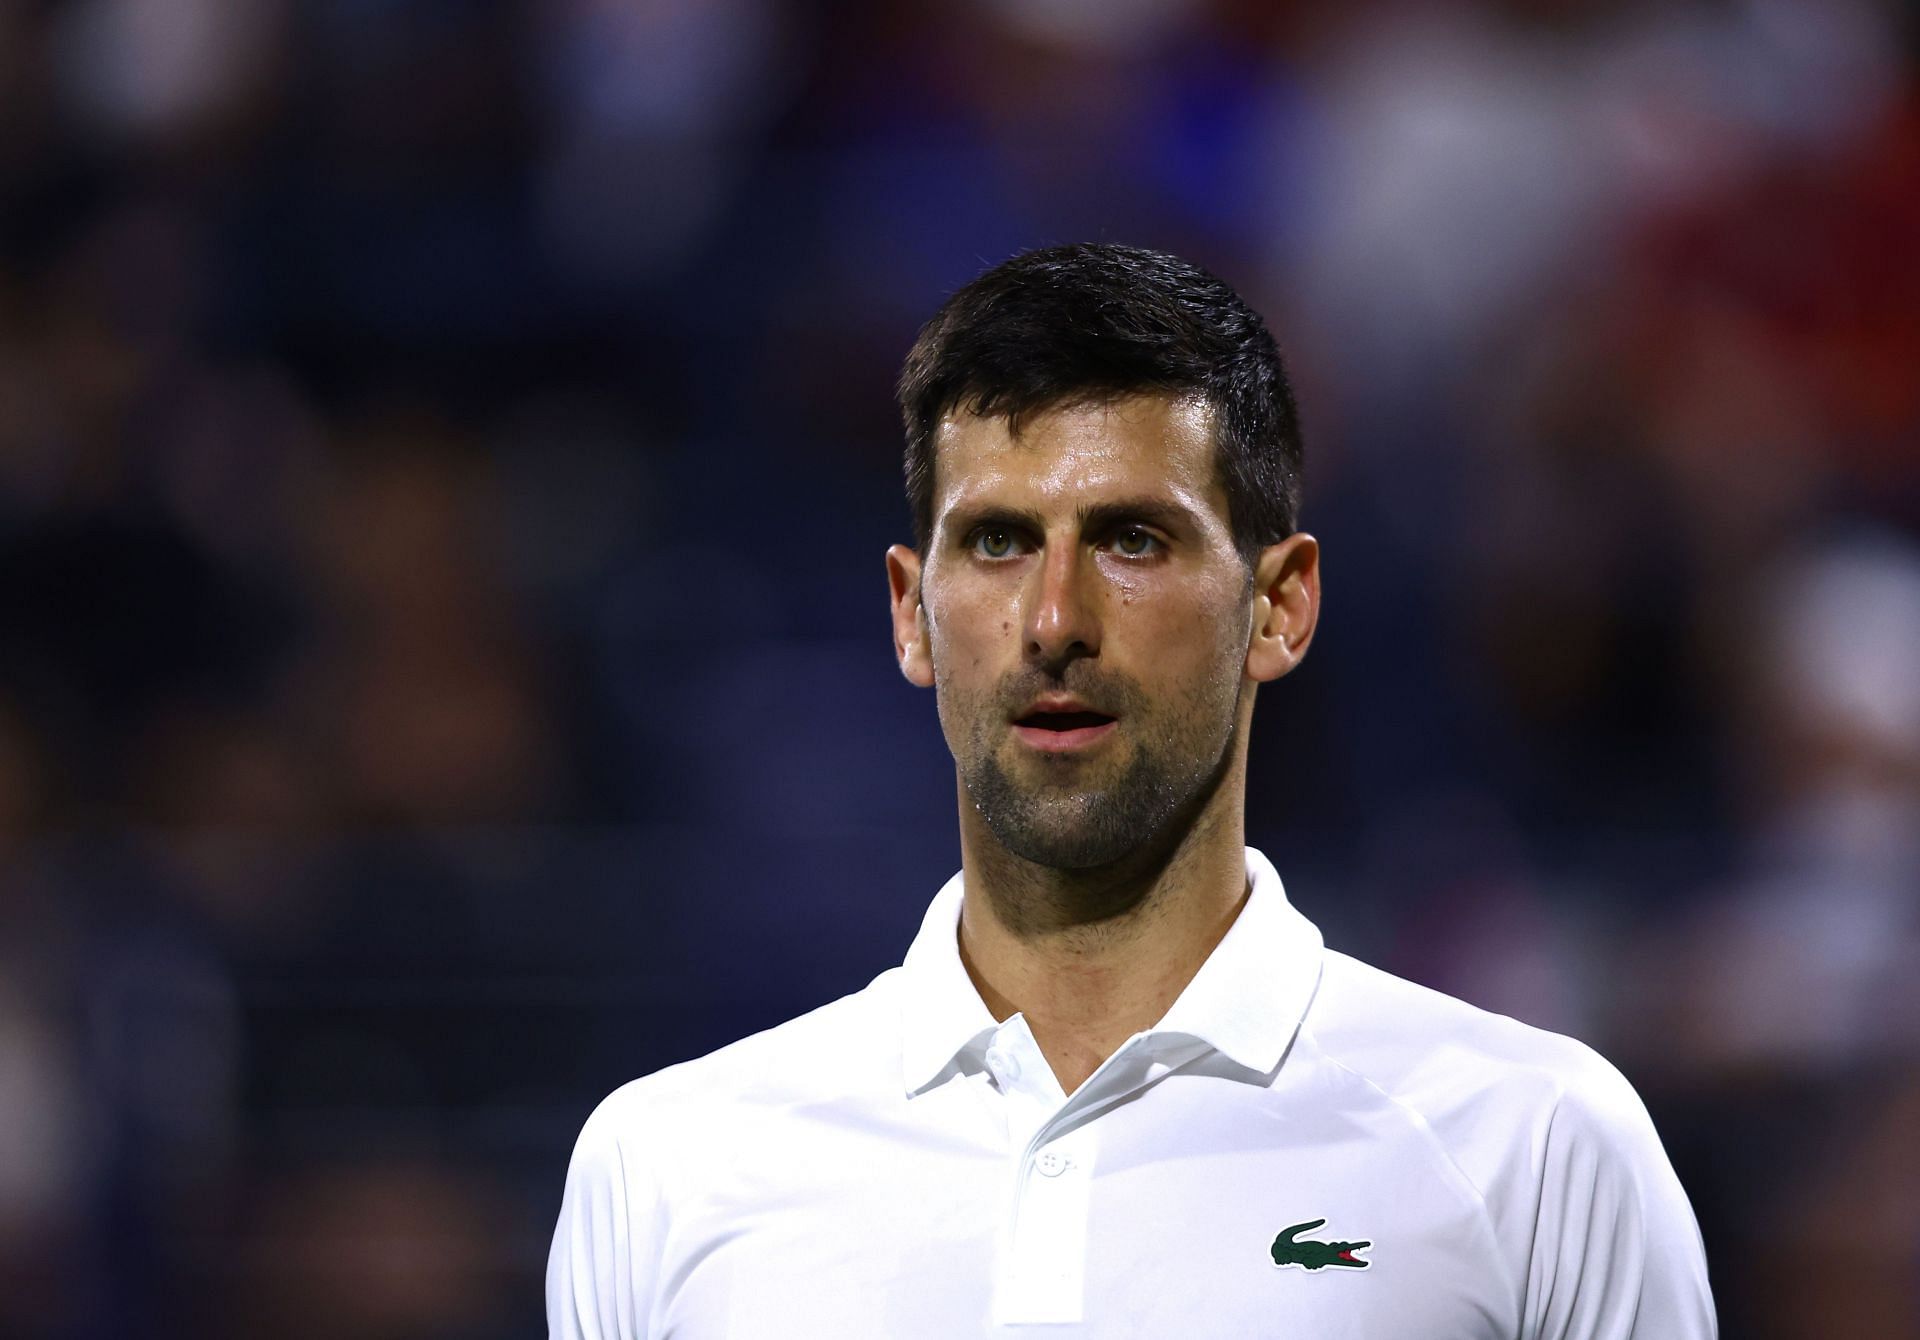 Novak Djokovic has won both of his matches this year in straight sets